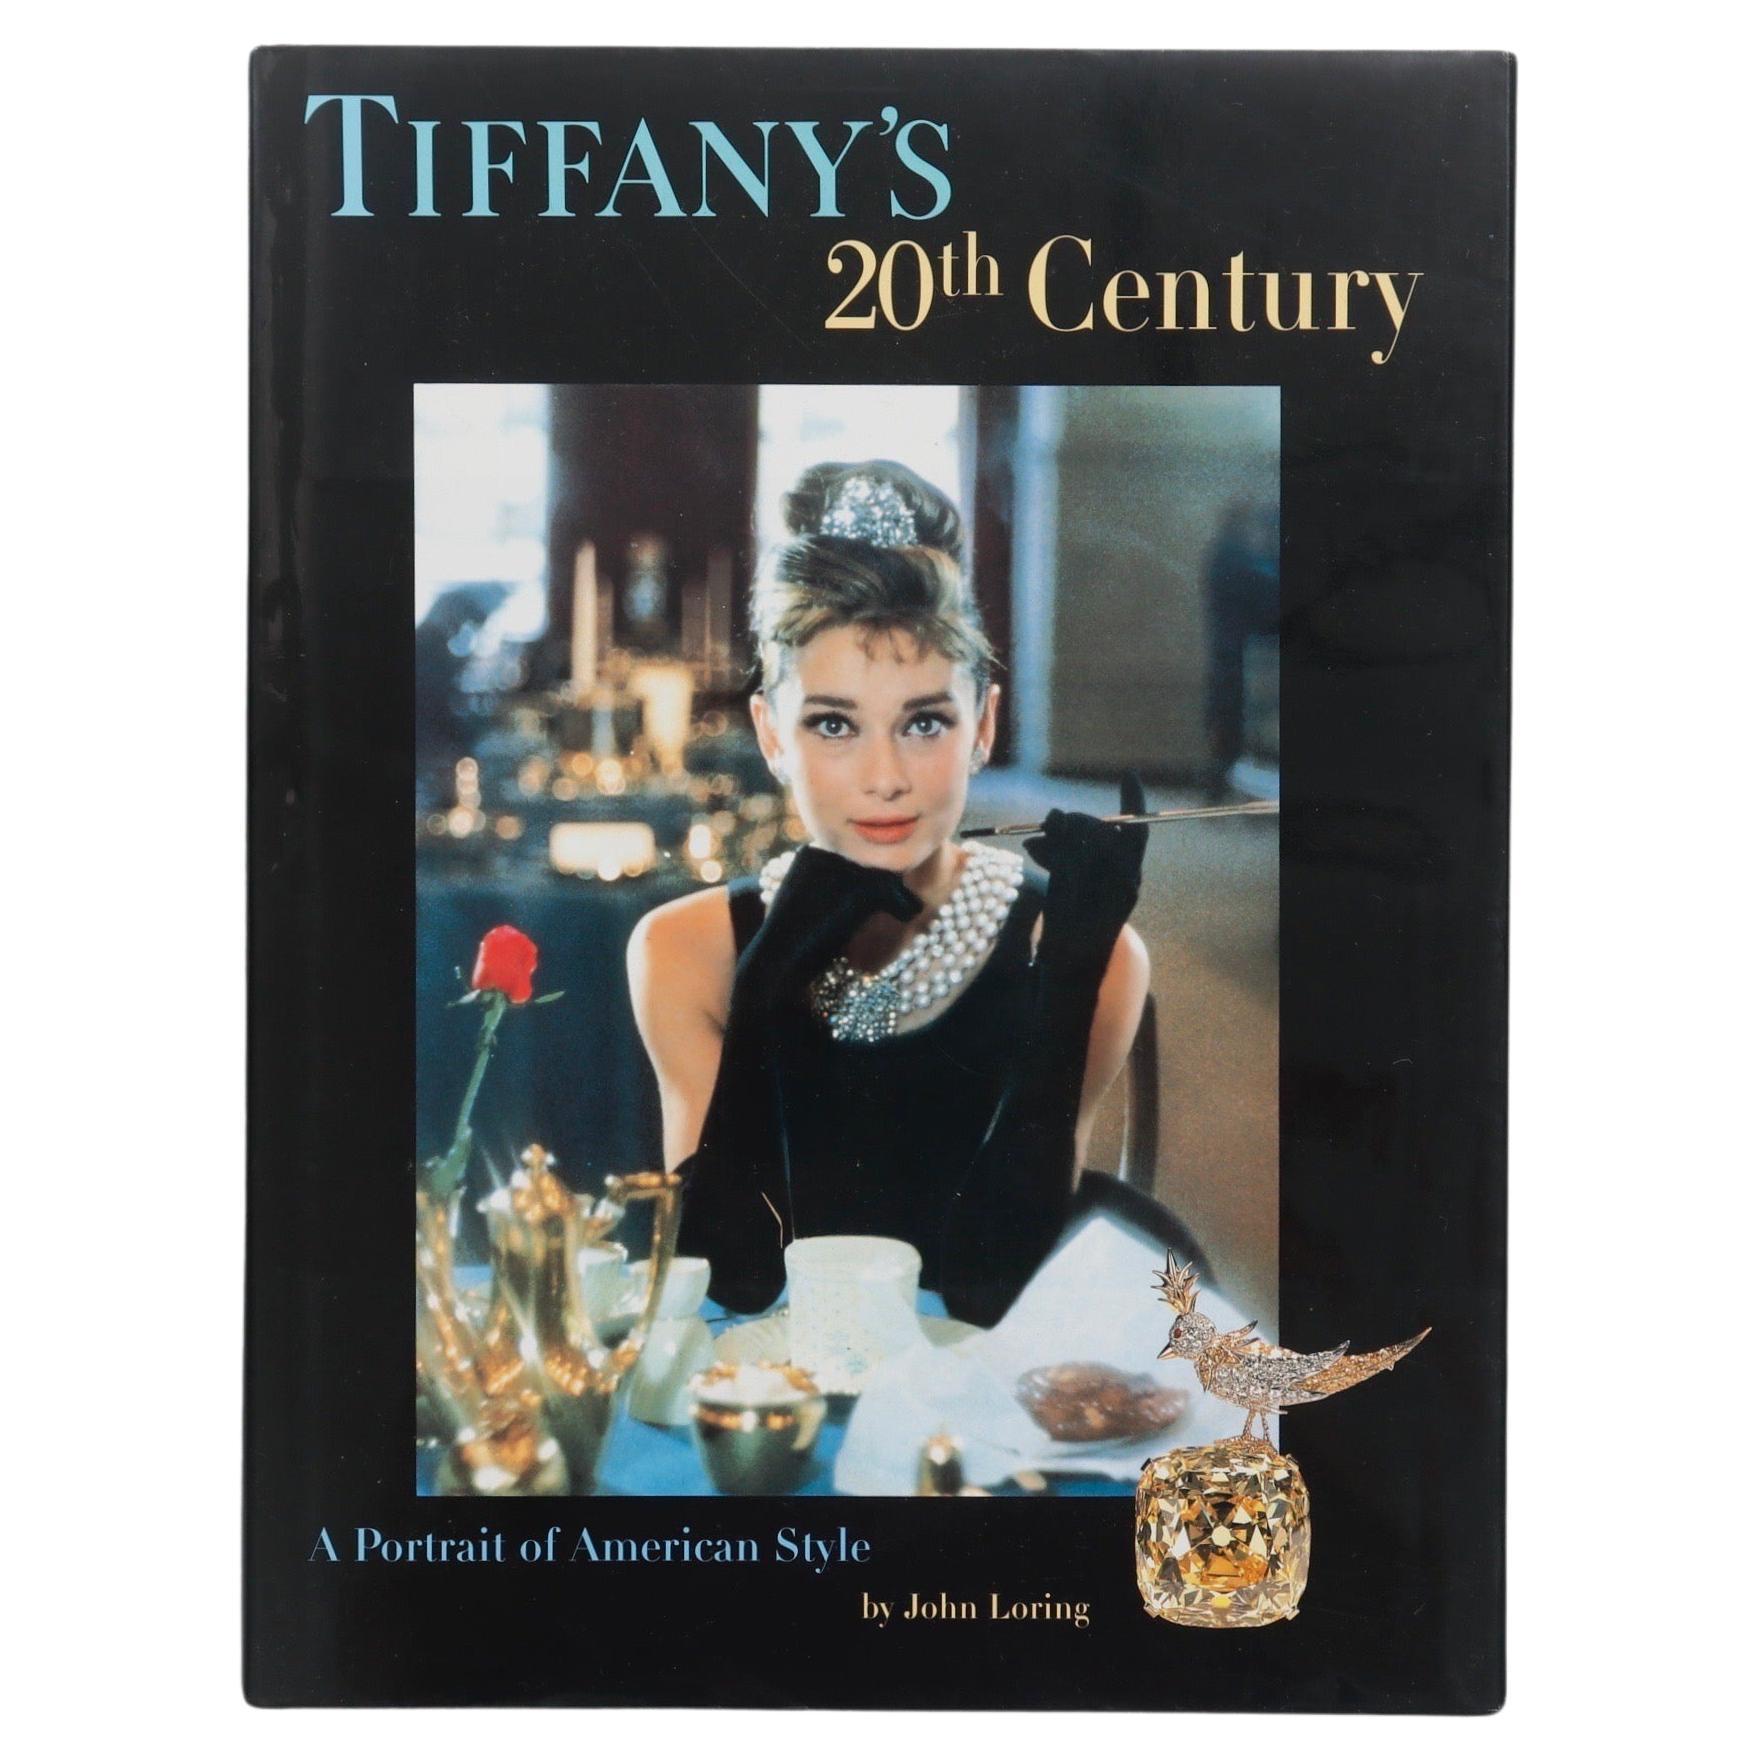 Tiffany's 20th Century by John Loring For Sale